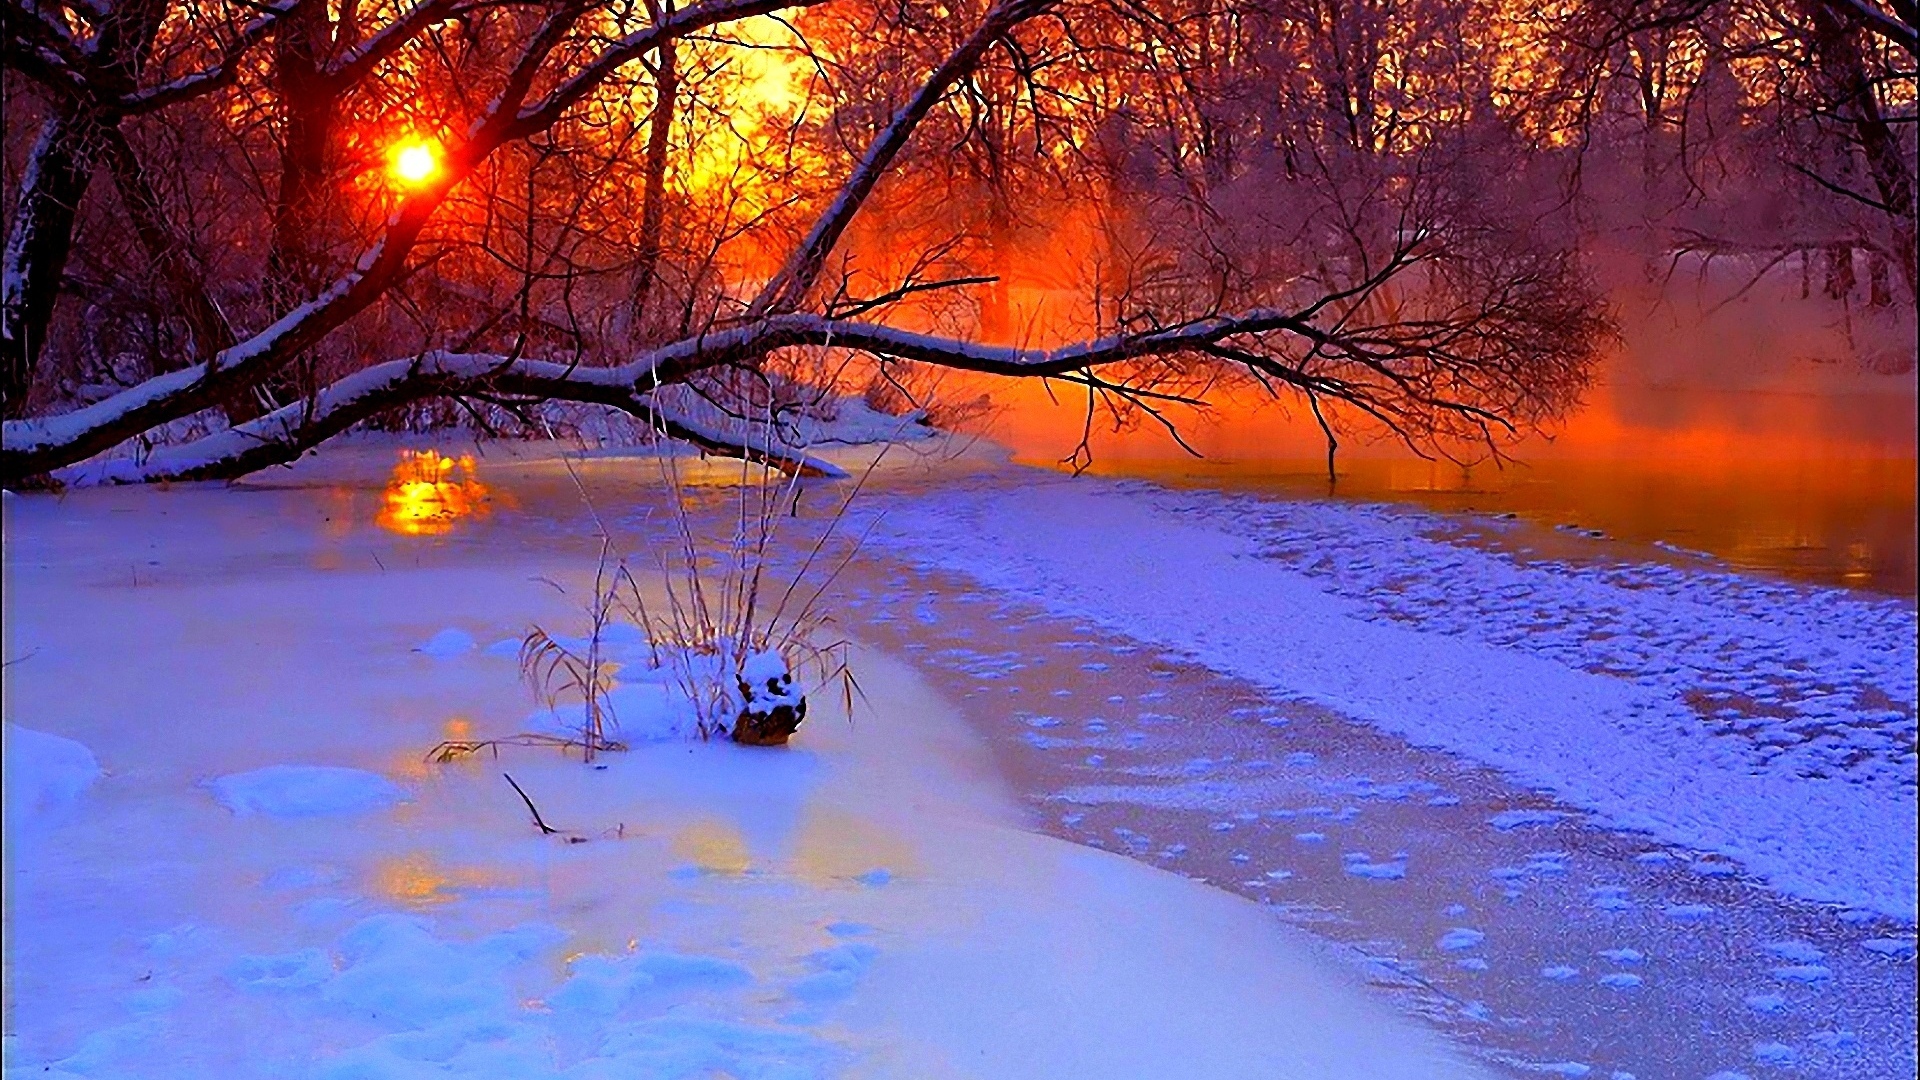 Download Wallpaper 1920x1080 winter, sunset, evening, branches, tree, pond, cold, snow Full HD 1080p HD Background